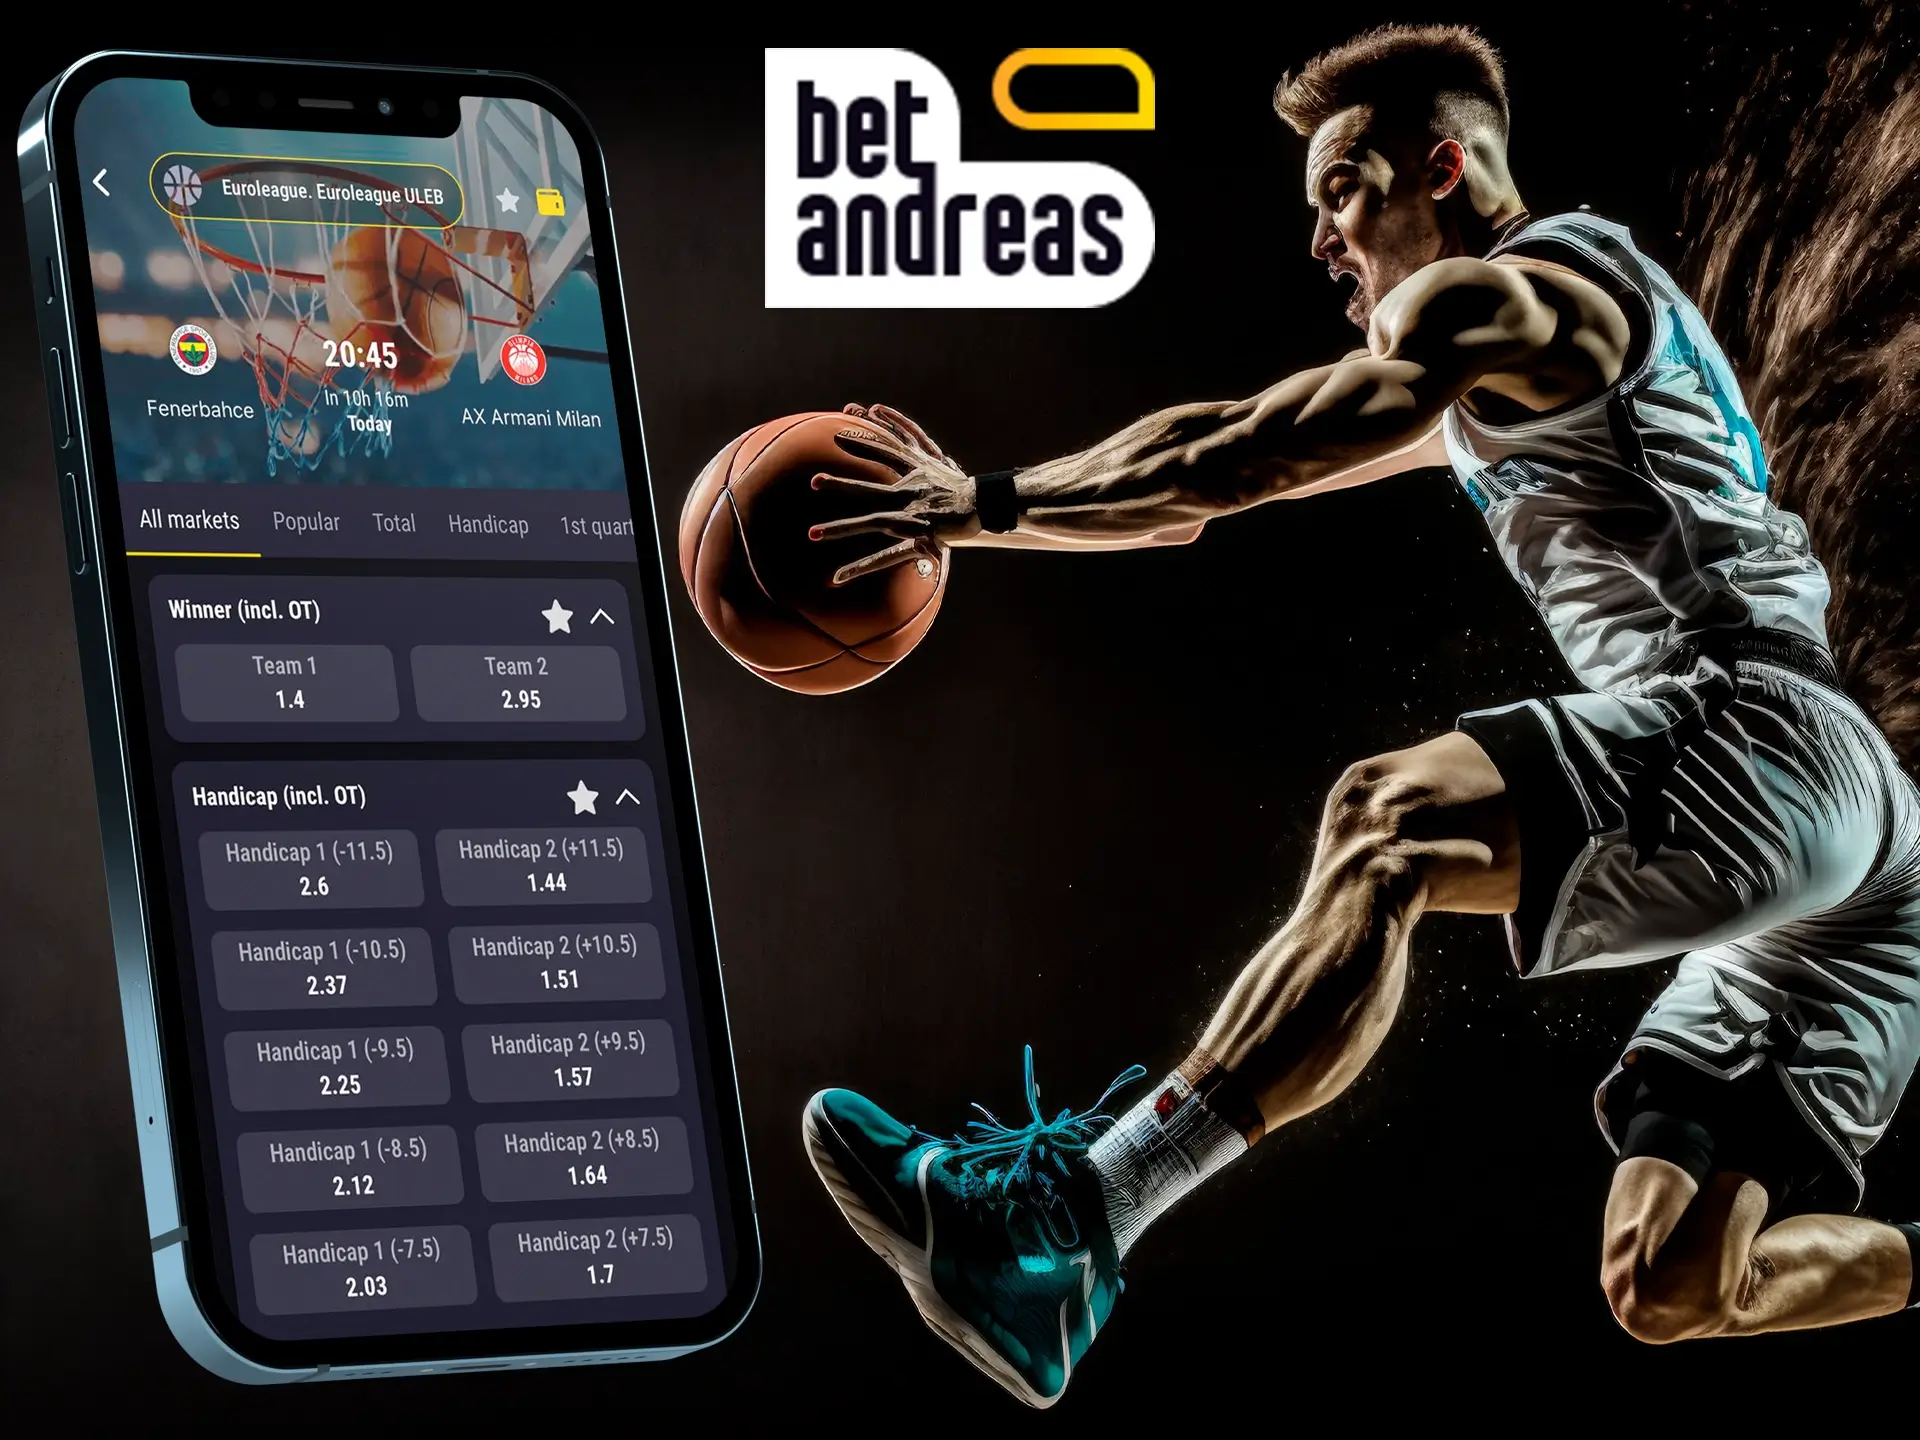 Legendary NBA clubs and players are already waiting for your outcomes in the BetAndreas app.